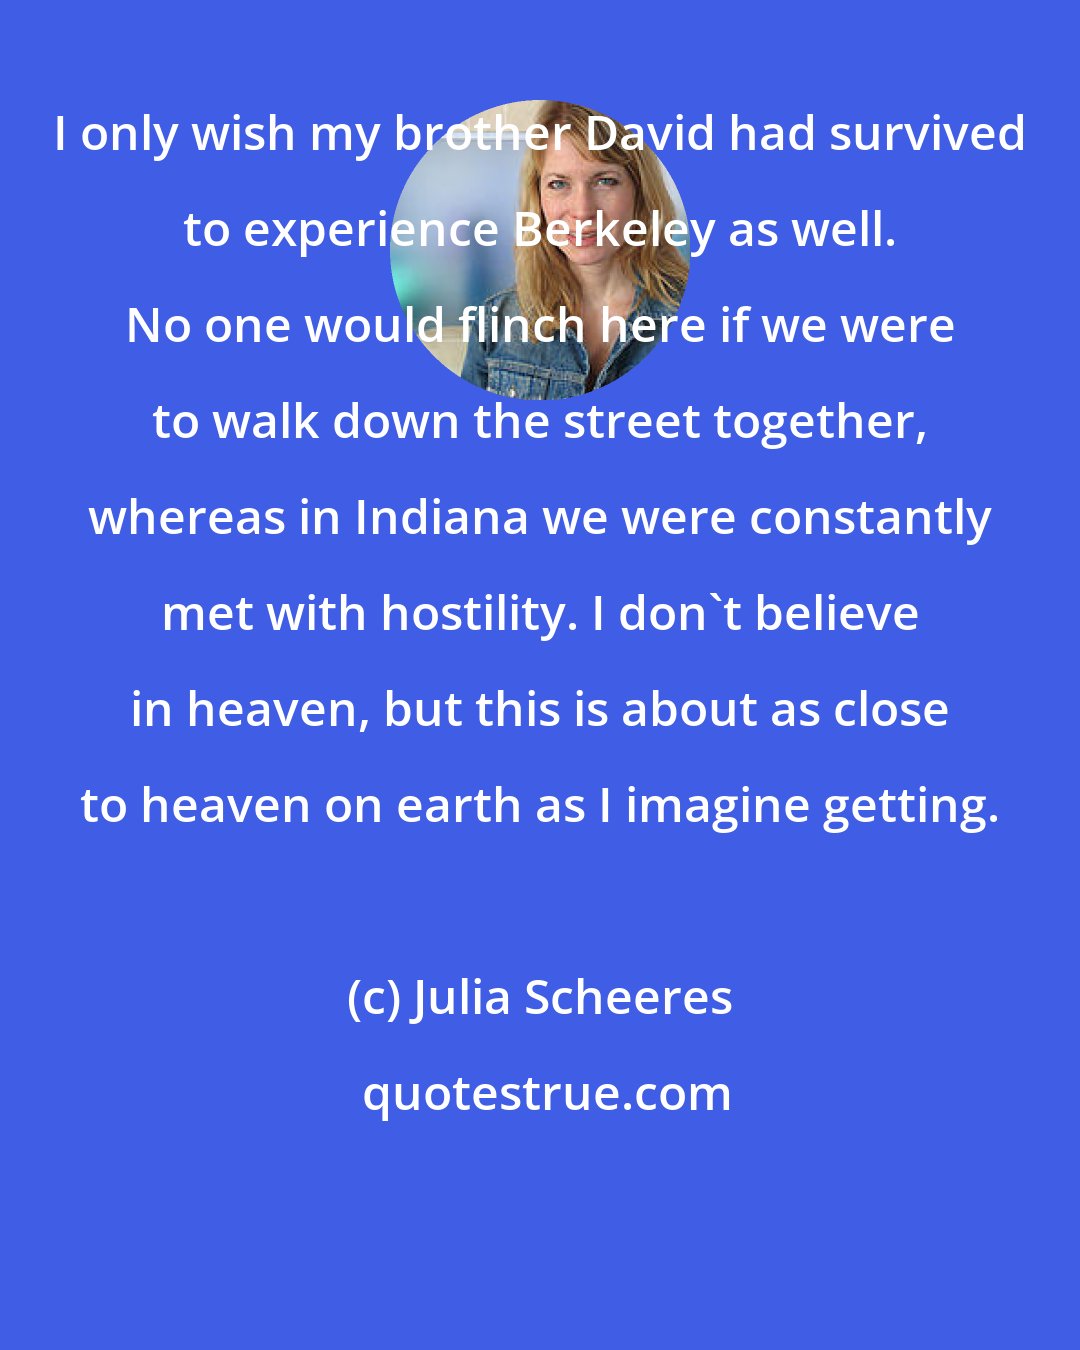 Julia Scheeres: I only wish my brother David had survived to experience Berkeley as well. No one would flinch here if we were to walk down the street together, whereas in Indiana we were constantly met with hostility. I don't believe in heaven, but this is about as close to heaven on earth as I imagine getting.